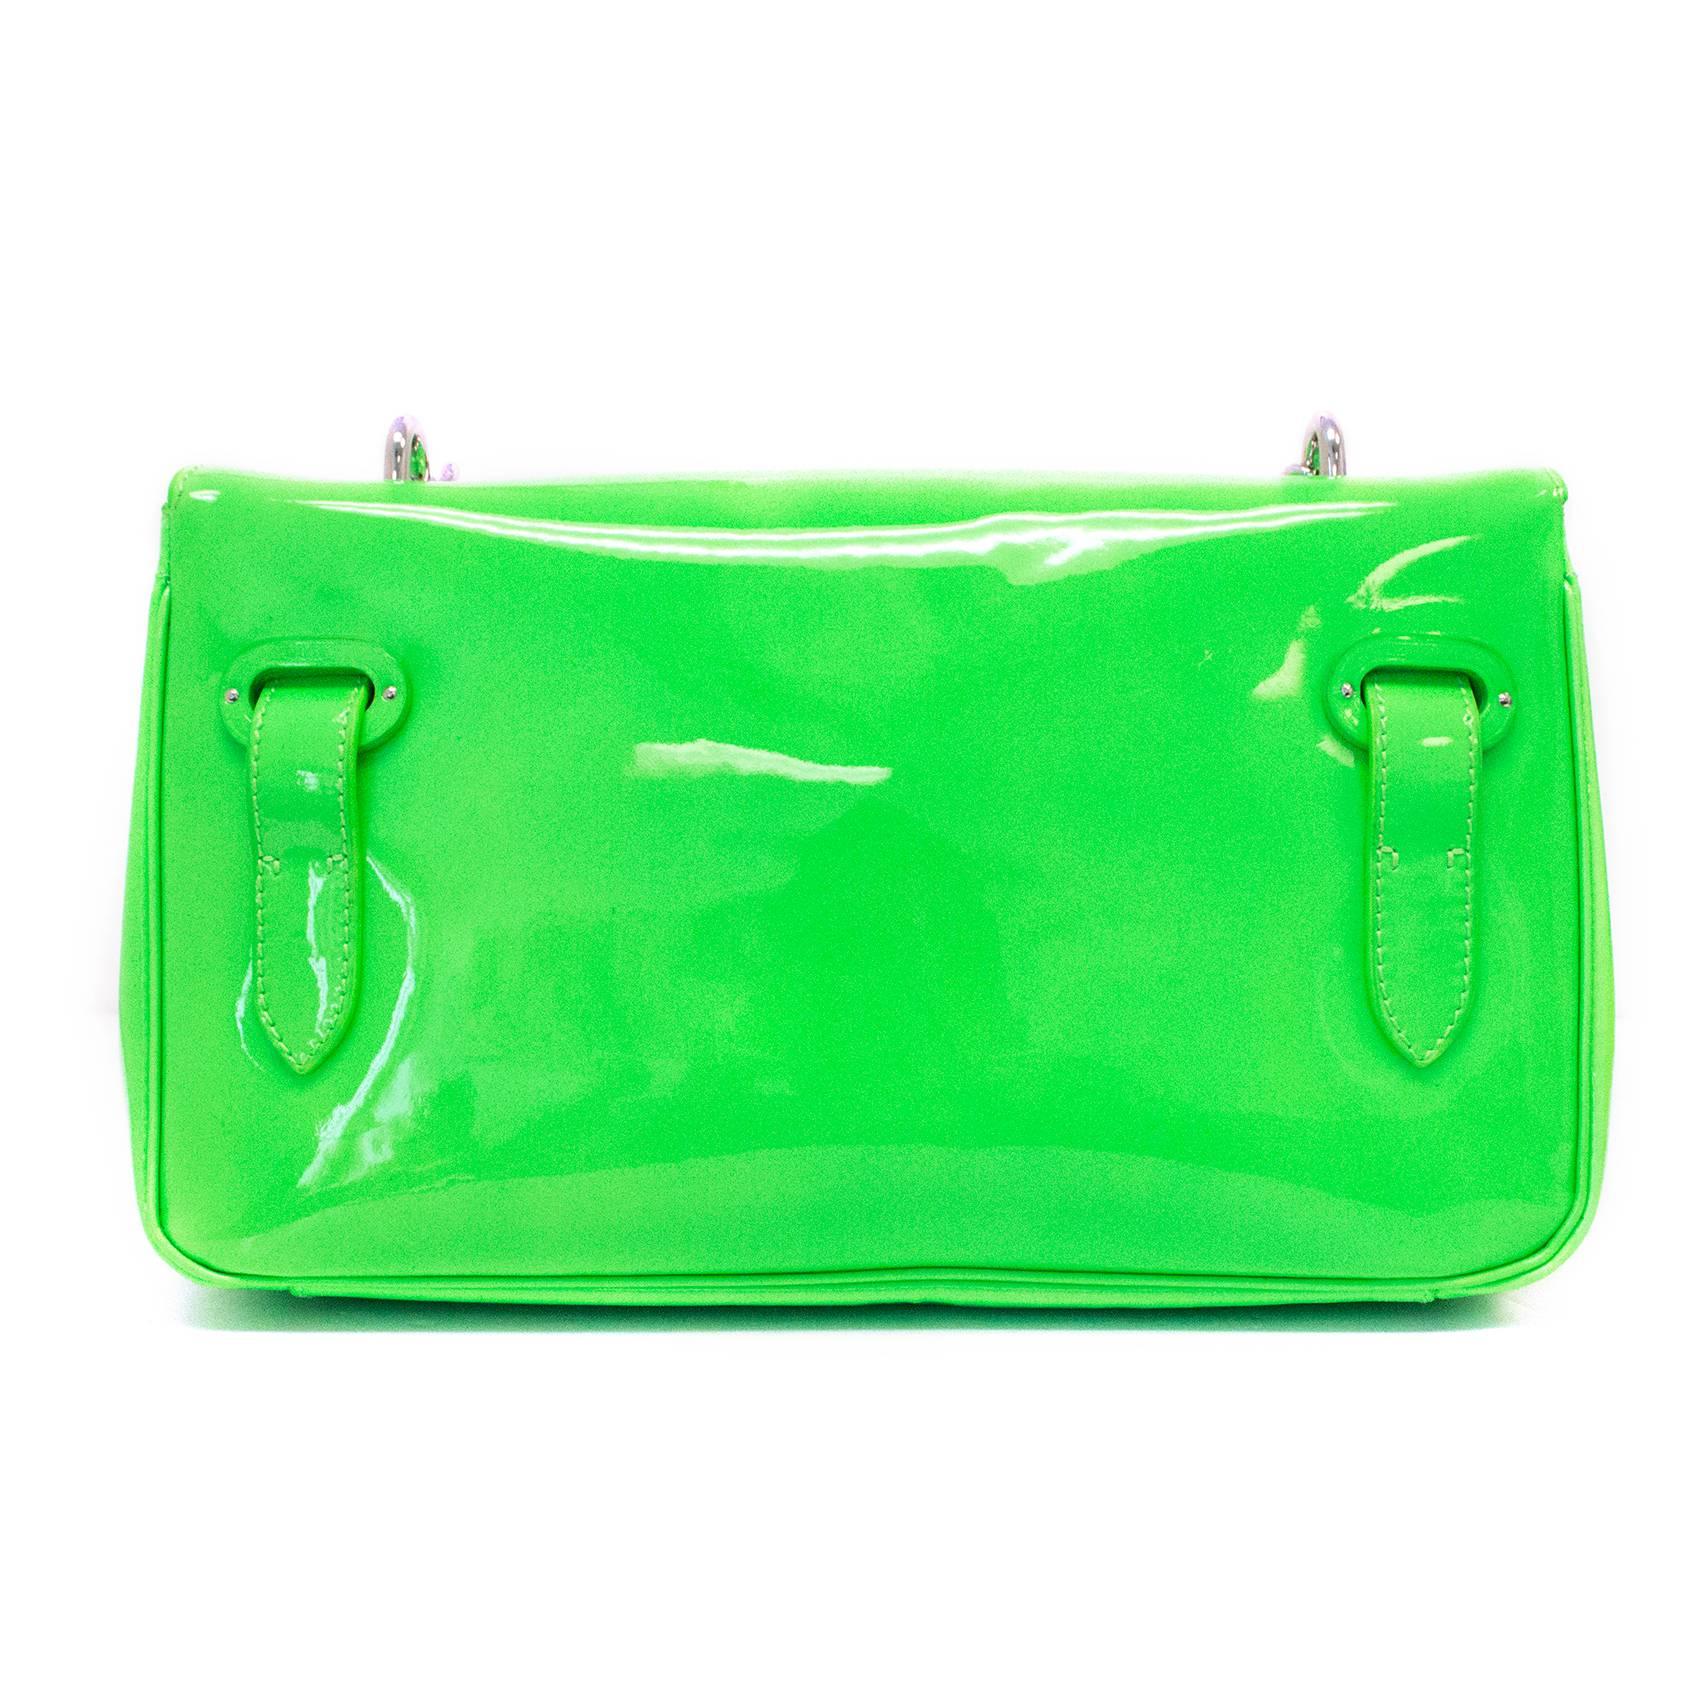 Ralph Lauren 'Ricky' Neon Green Shoulder Bag  In Excellent Condition For Sale In London, GB